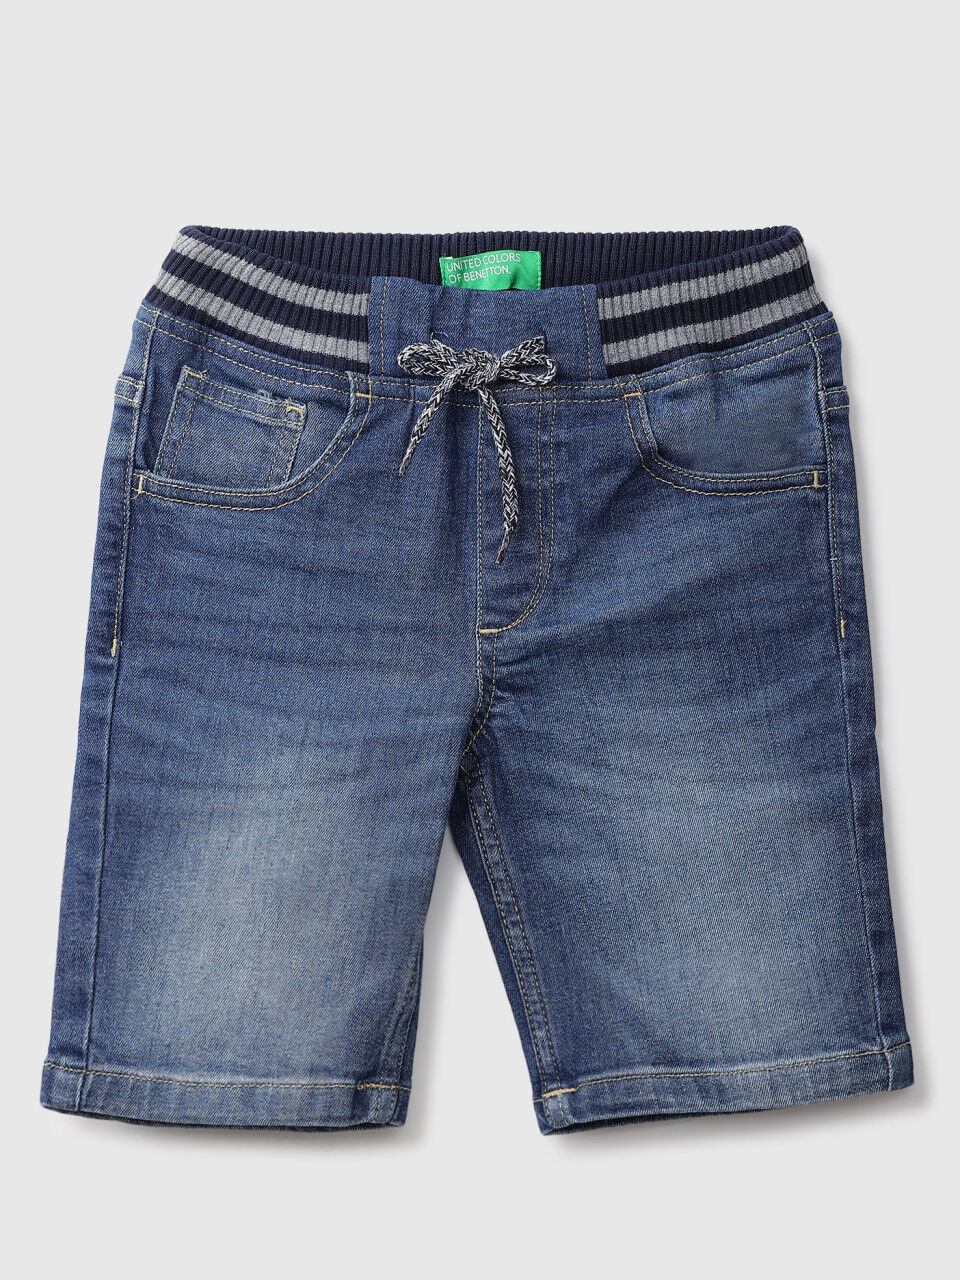 United Colors Of Benetton Ribbed Denim Shorts